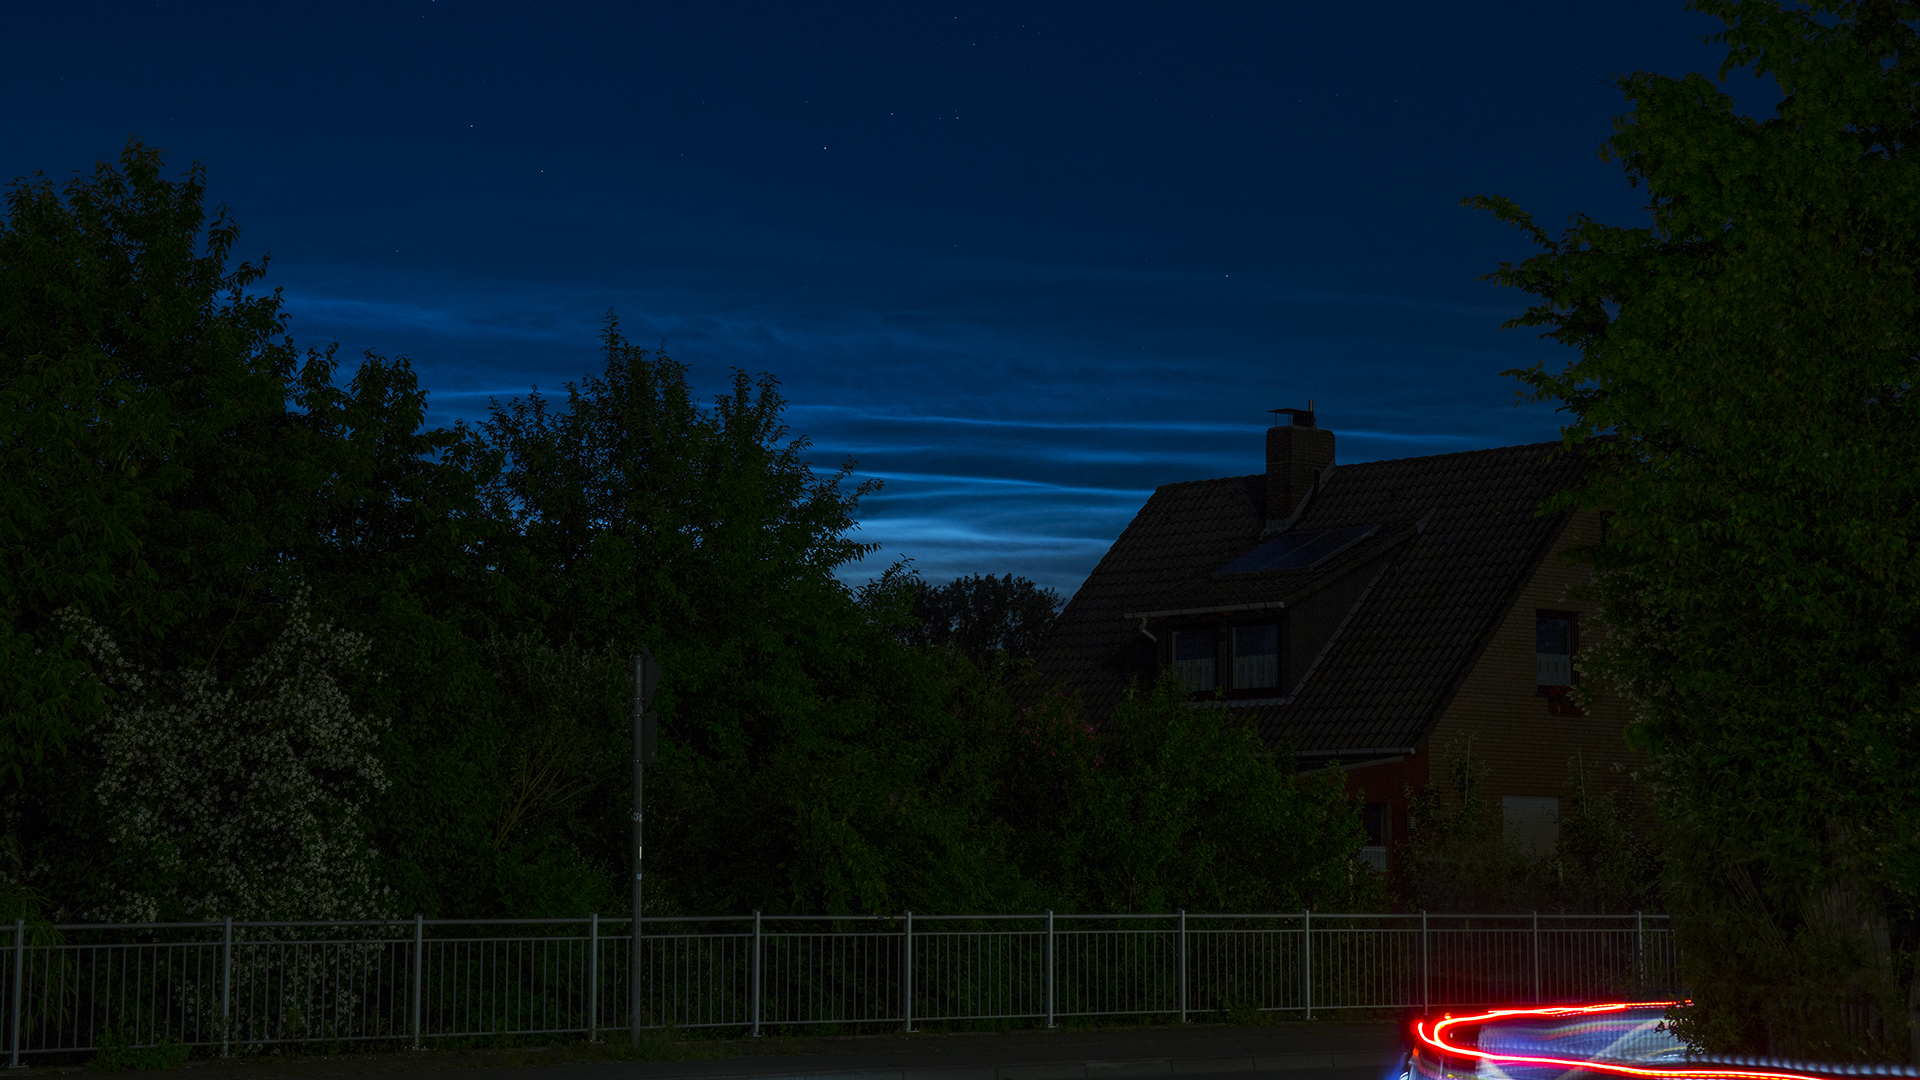 Noctilucent Clouds (2019:06:16 22:15:54 UT, Canon EOS 6D, 5s, f/6.3, f=70mm, ISO 400)